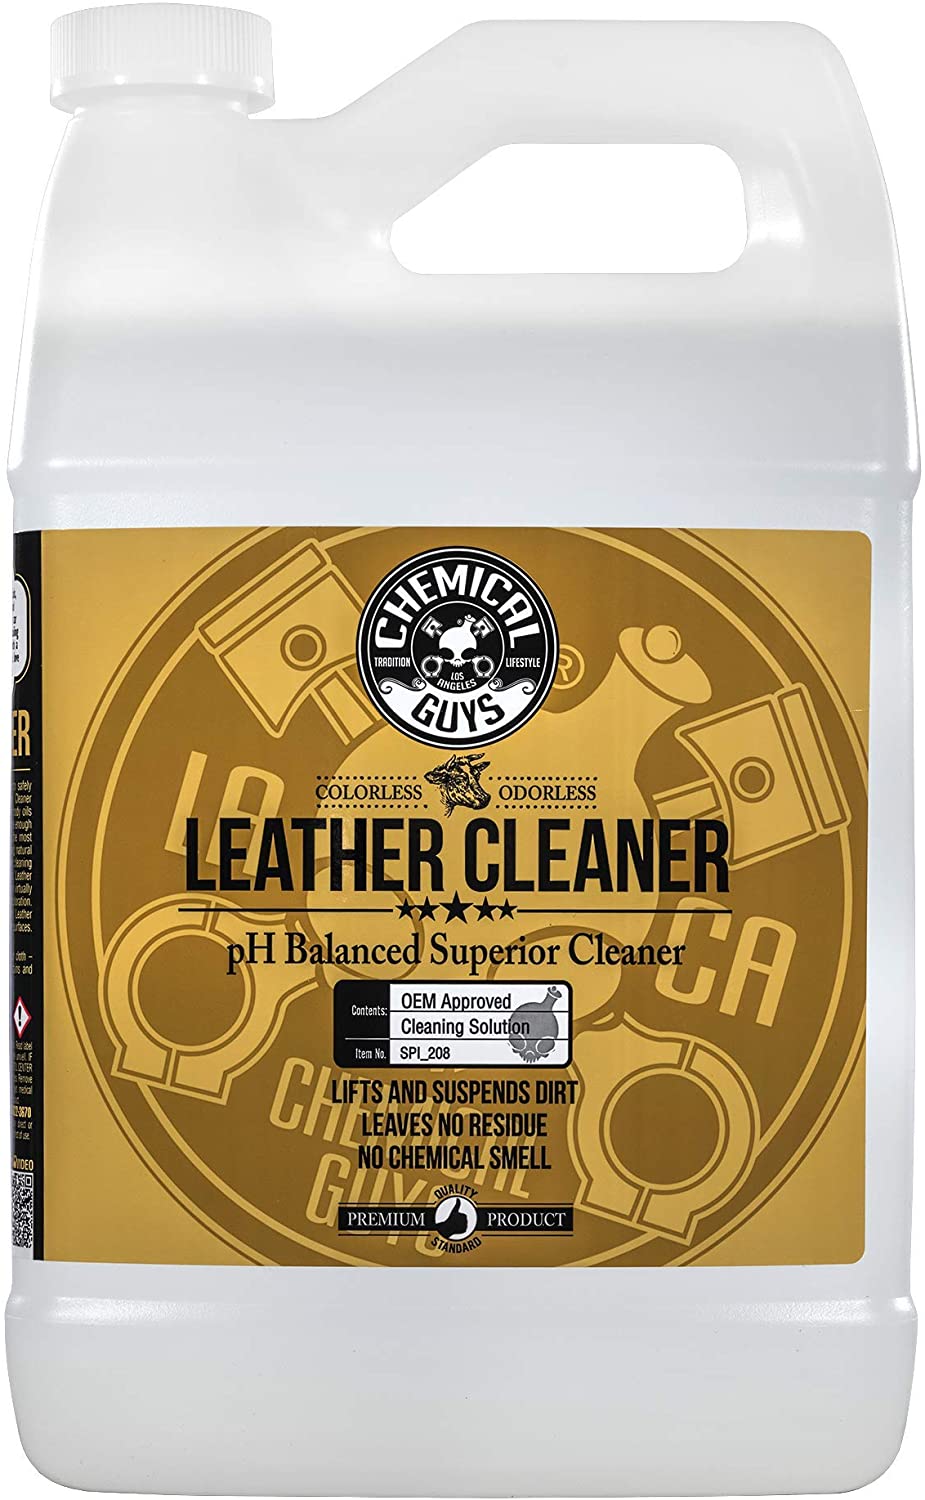 Woot!, 1 gallon Chemical Guys Colorless and Odorless Leather Cleaner, $13.99, free shipping for Prime